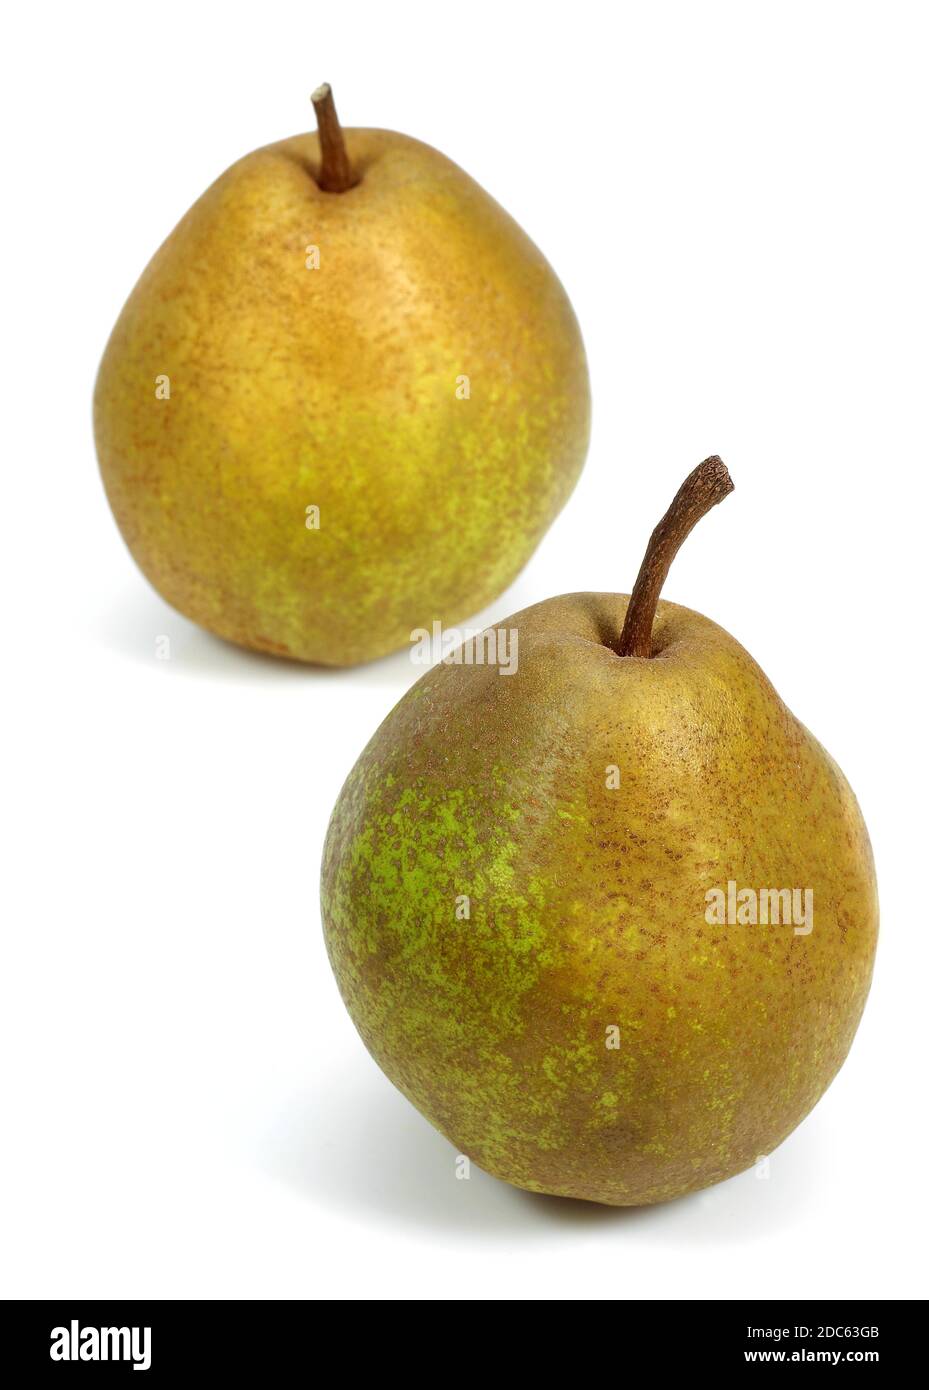 BEURRE HARDY PEAR pyrus communis AGAINST WHITE BACKGROUND Stock Photo